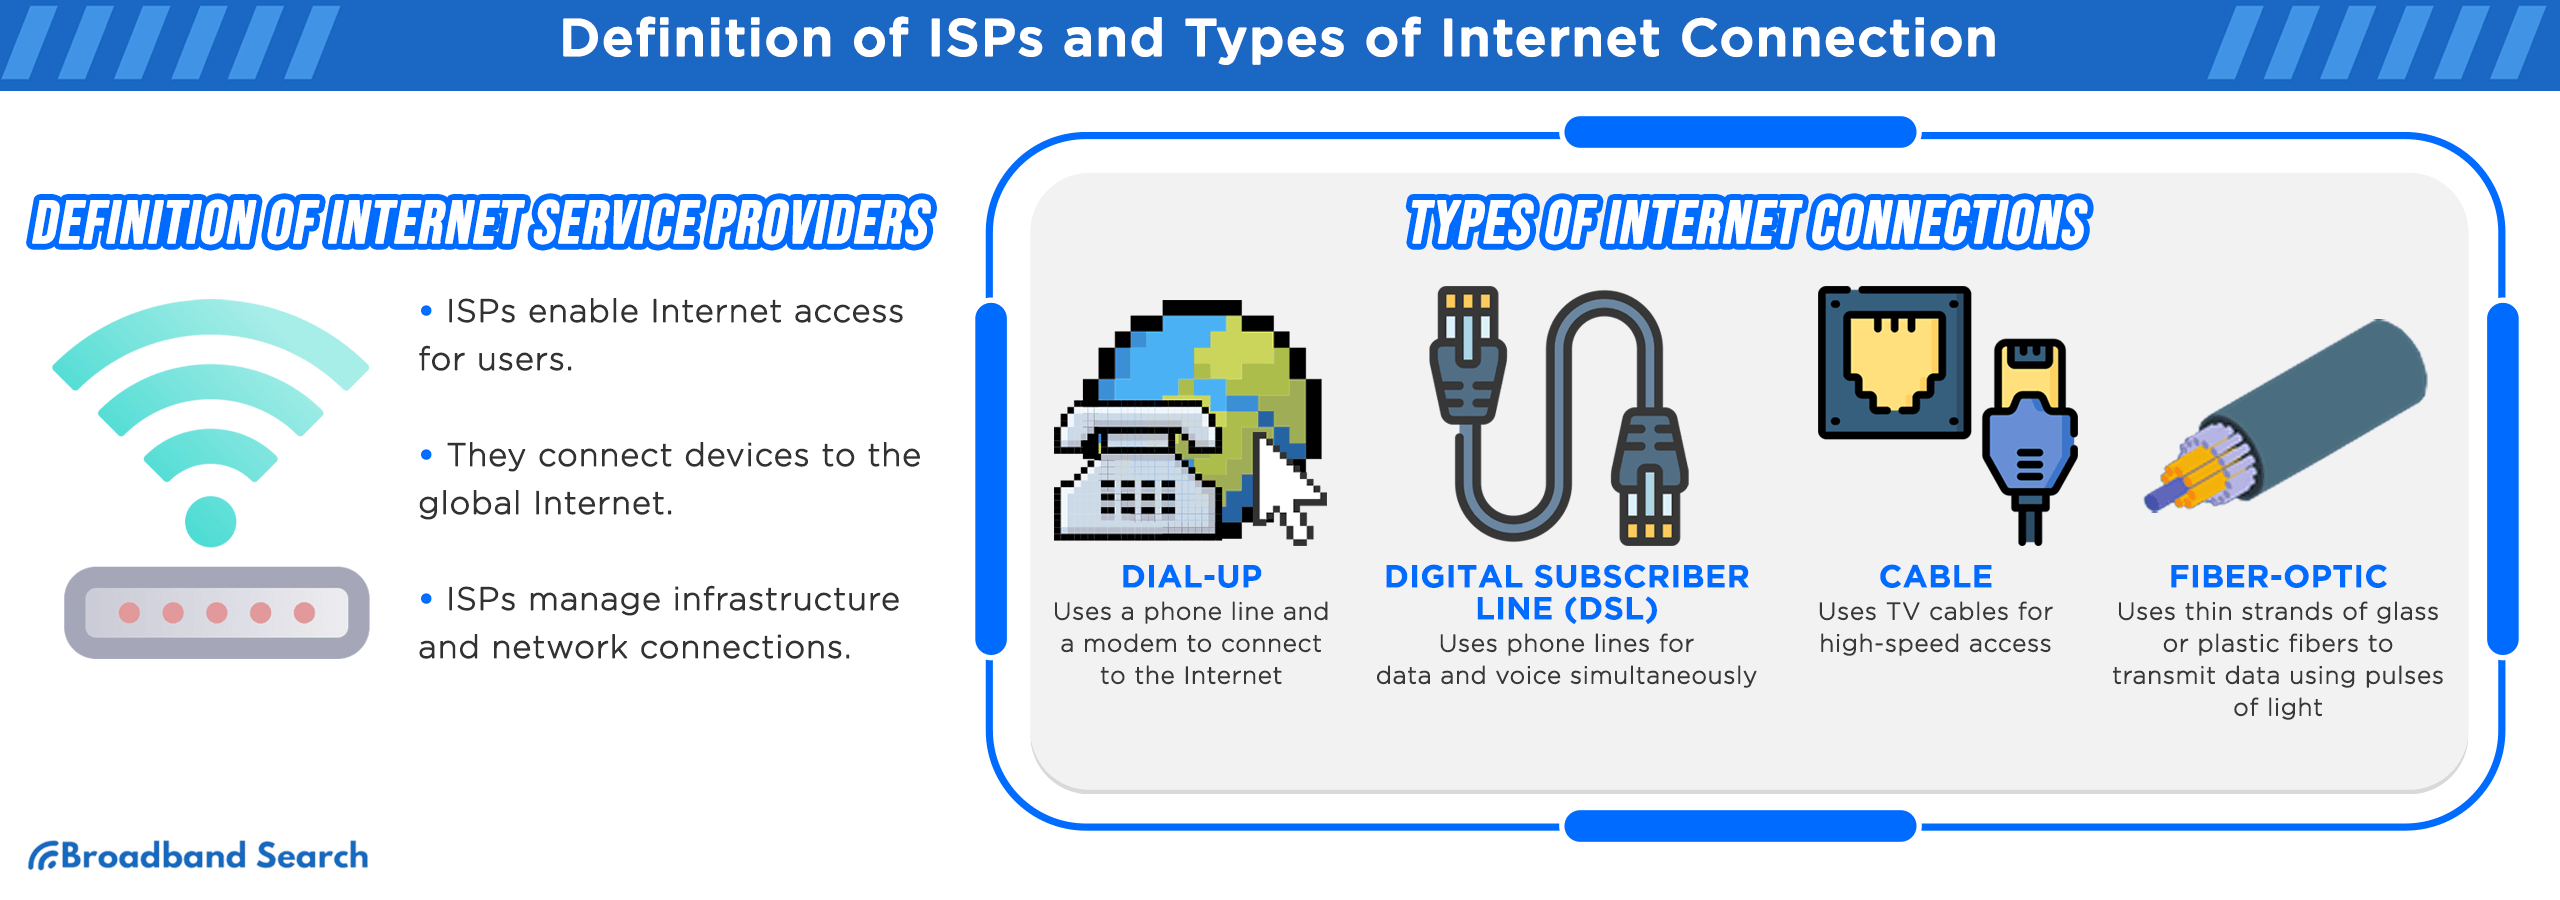 Definition of isps and types of internet connections